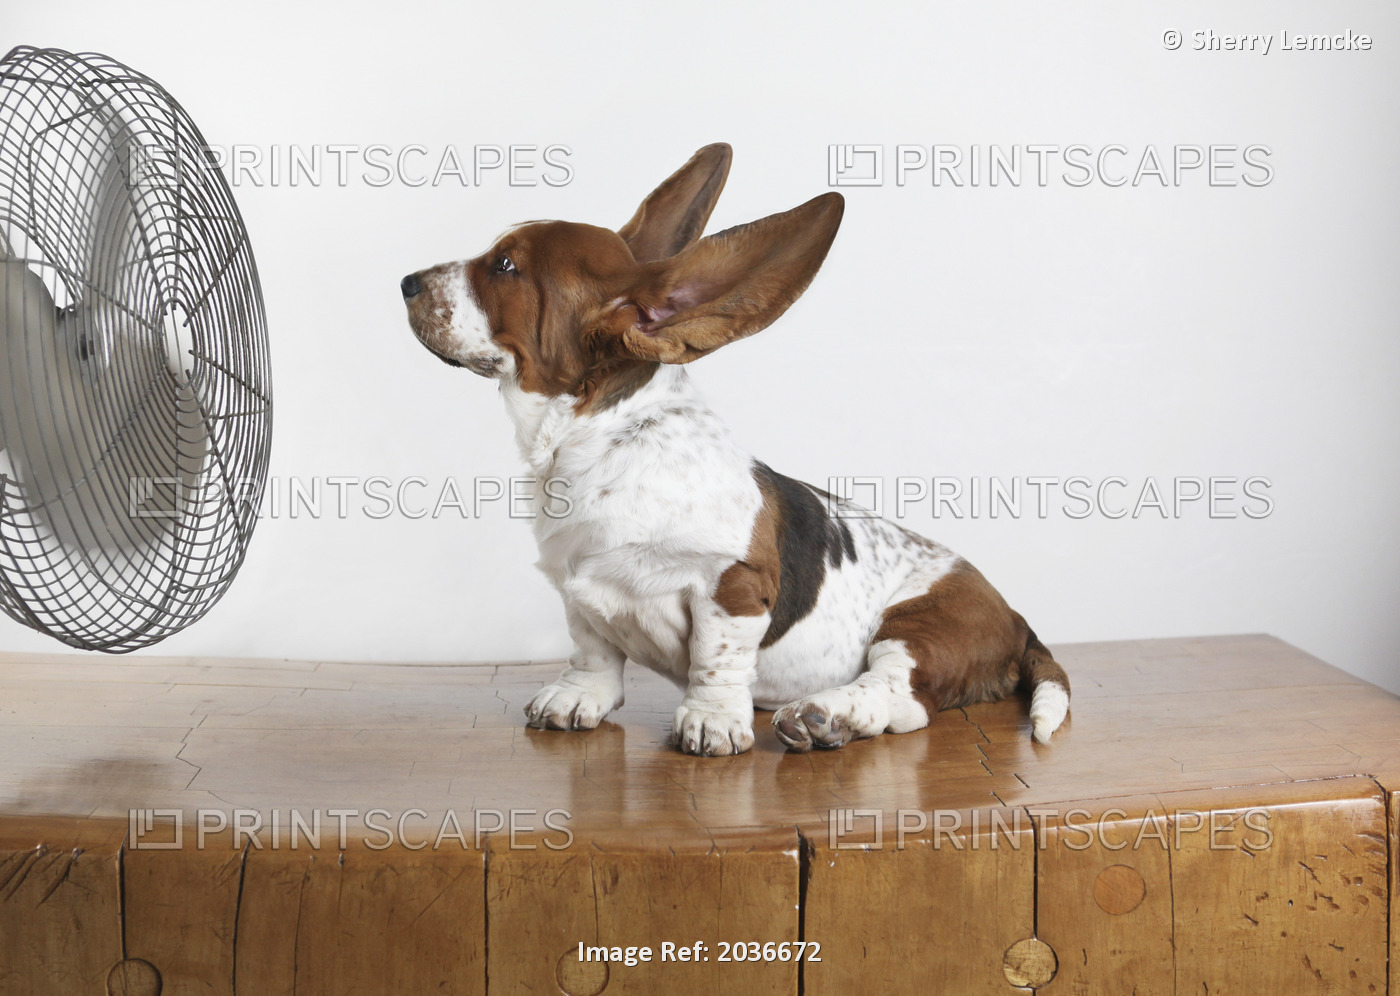 Studio Shot Of A Basset Hound With Fan Blowing It's Ears Up.